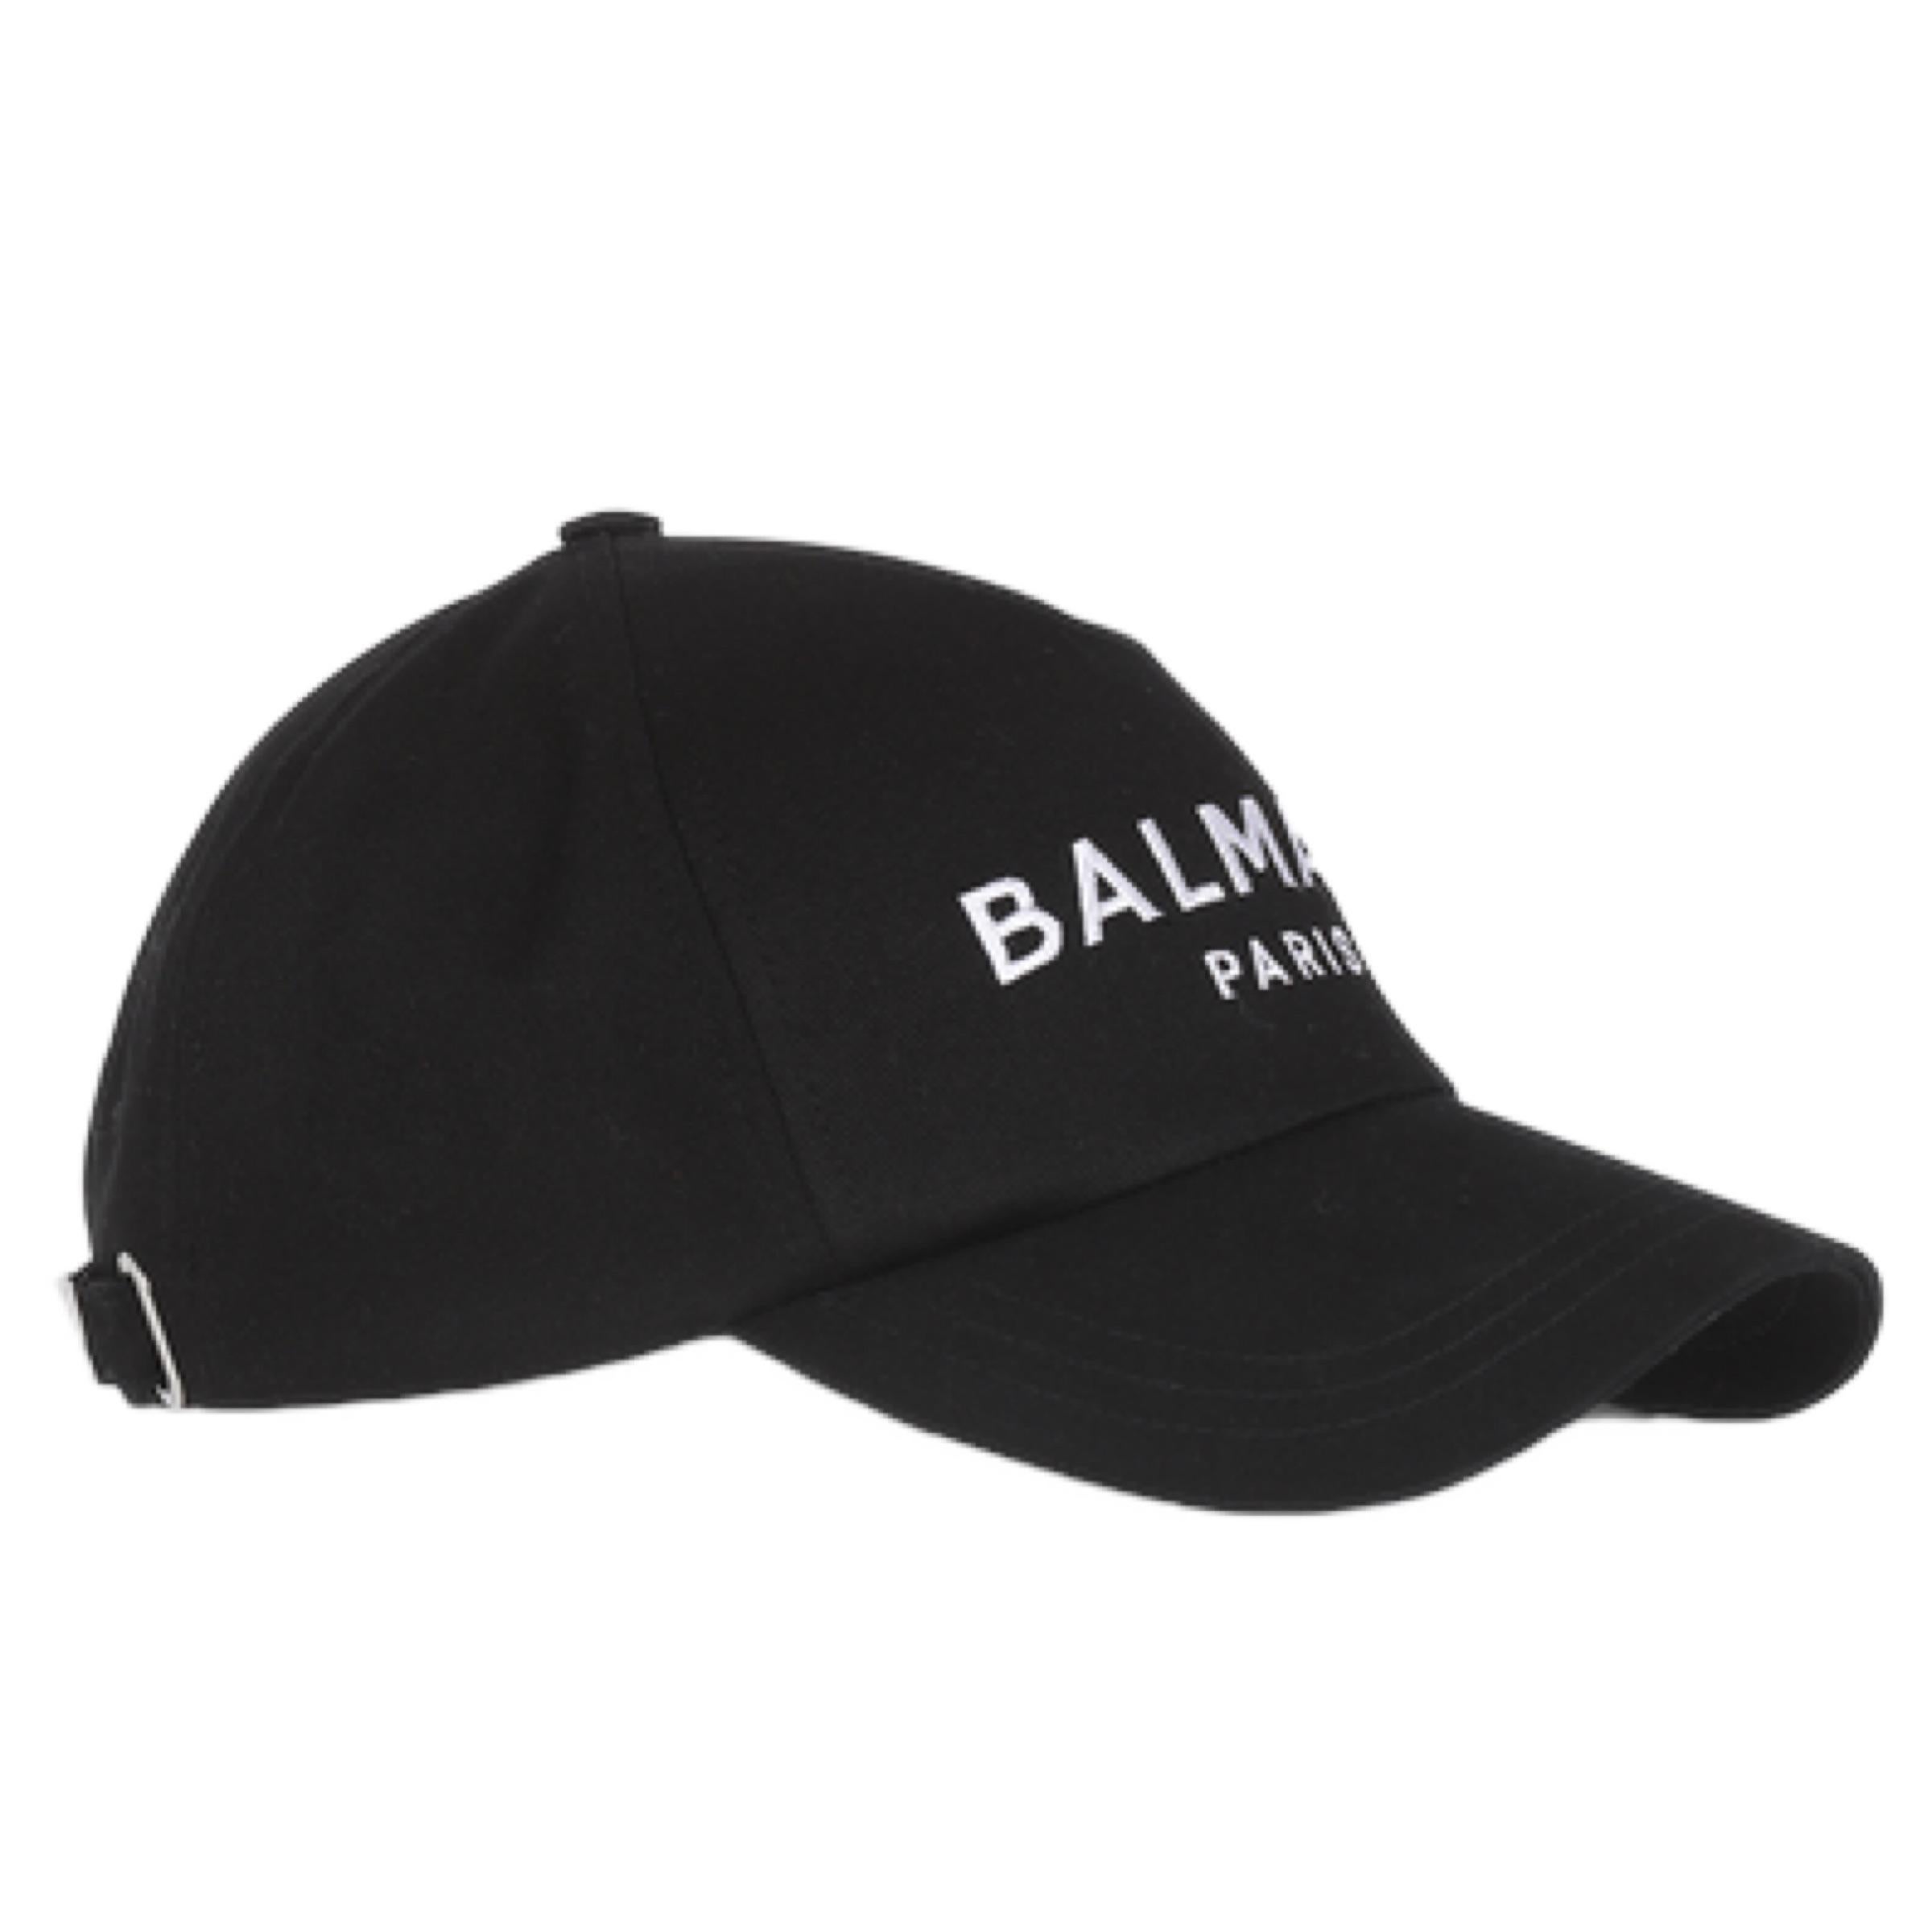 New Balmain Black Front Logo Cotton Cap

Authenticity Guaranteed

DETAILS
Brand: Balmain
Condition: Brand new
Gender: Unisex
Category: Cap
Color: Black
Material: Cotton
Front logo print
Made in Italy
Includes: box, dust bag, and brand authenticity